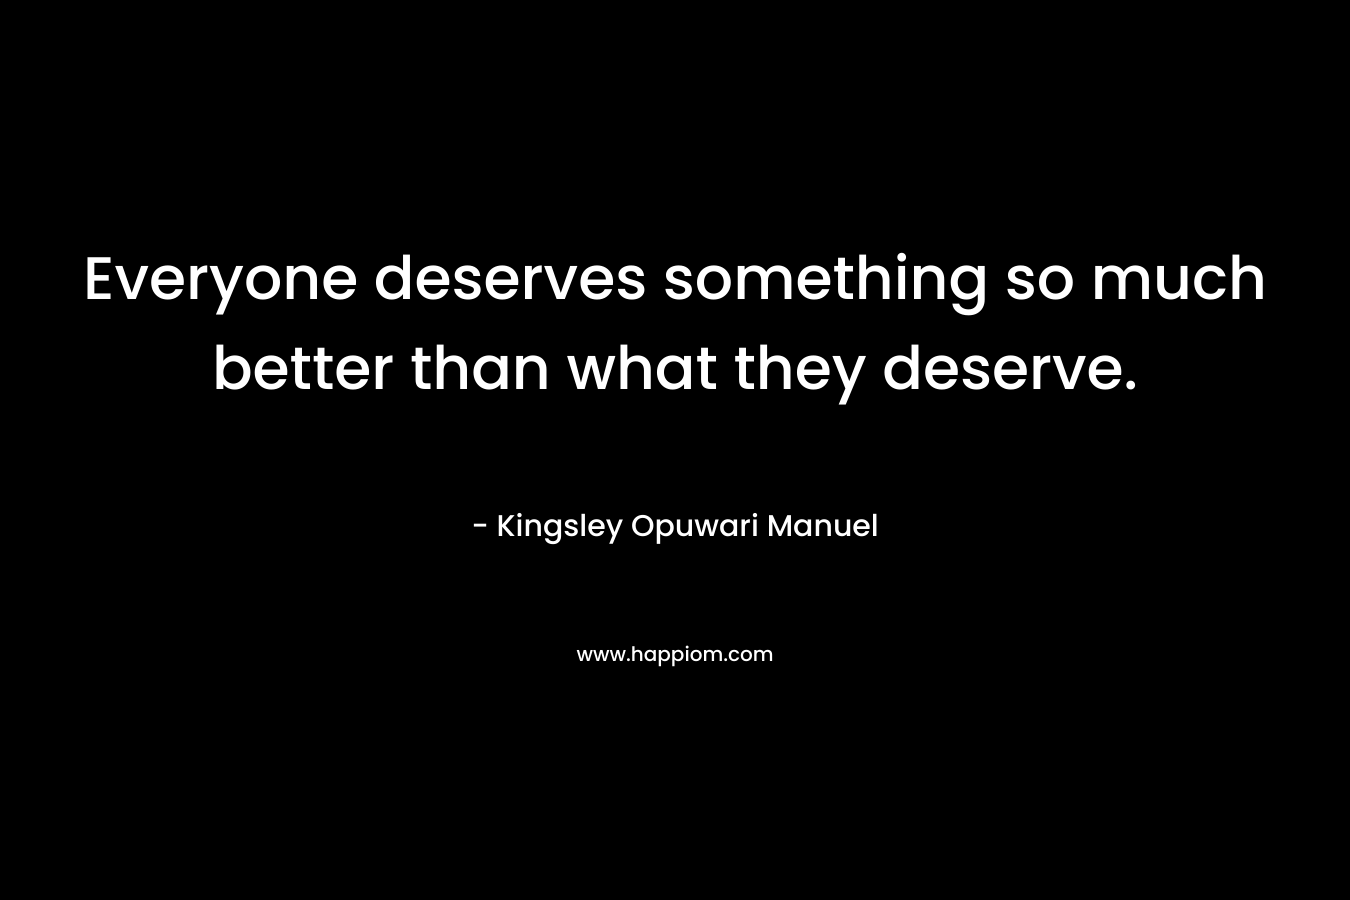 Everyone deserves something so much better than what they deserve.